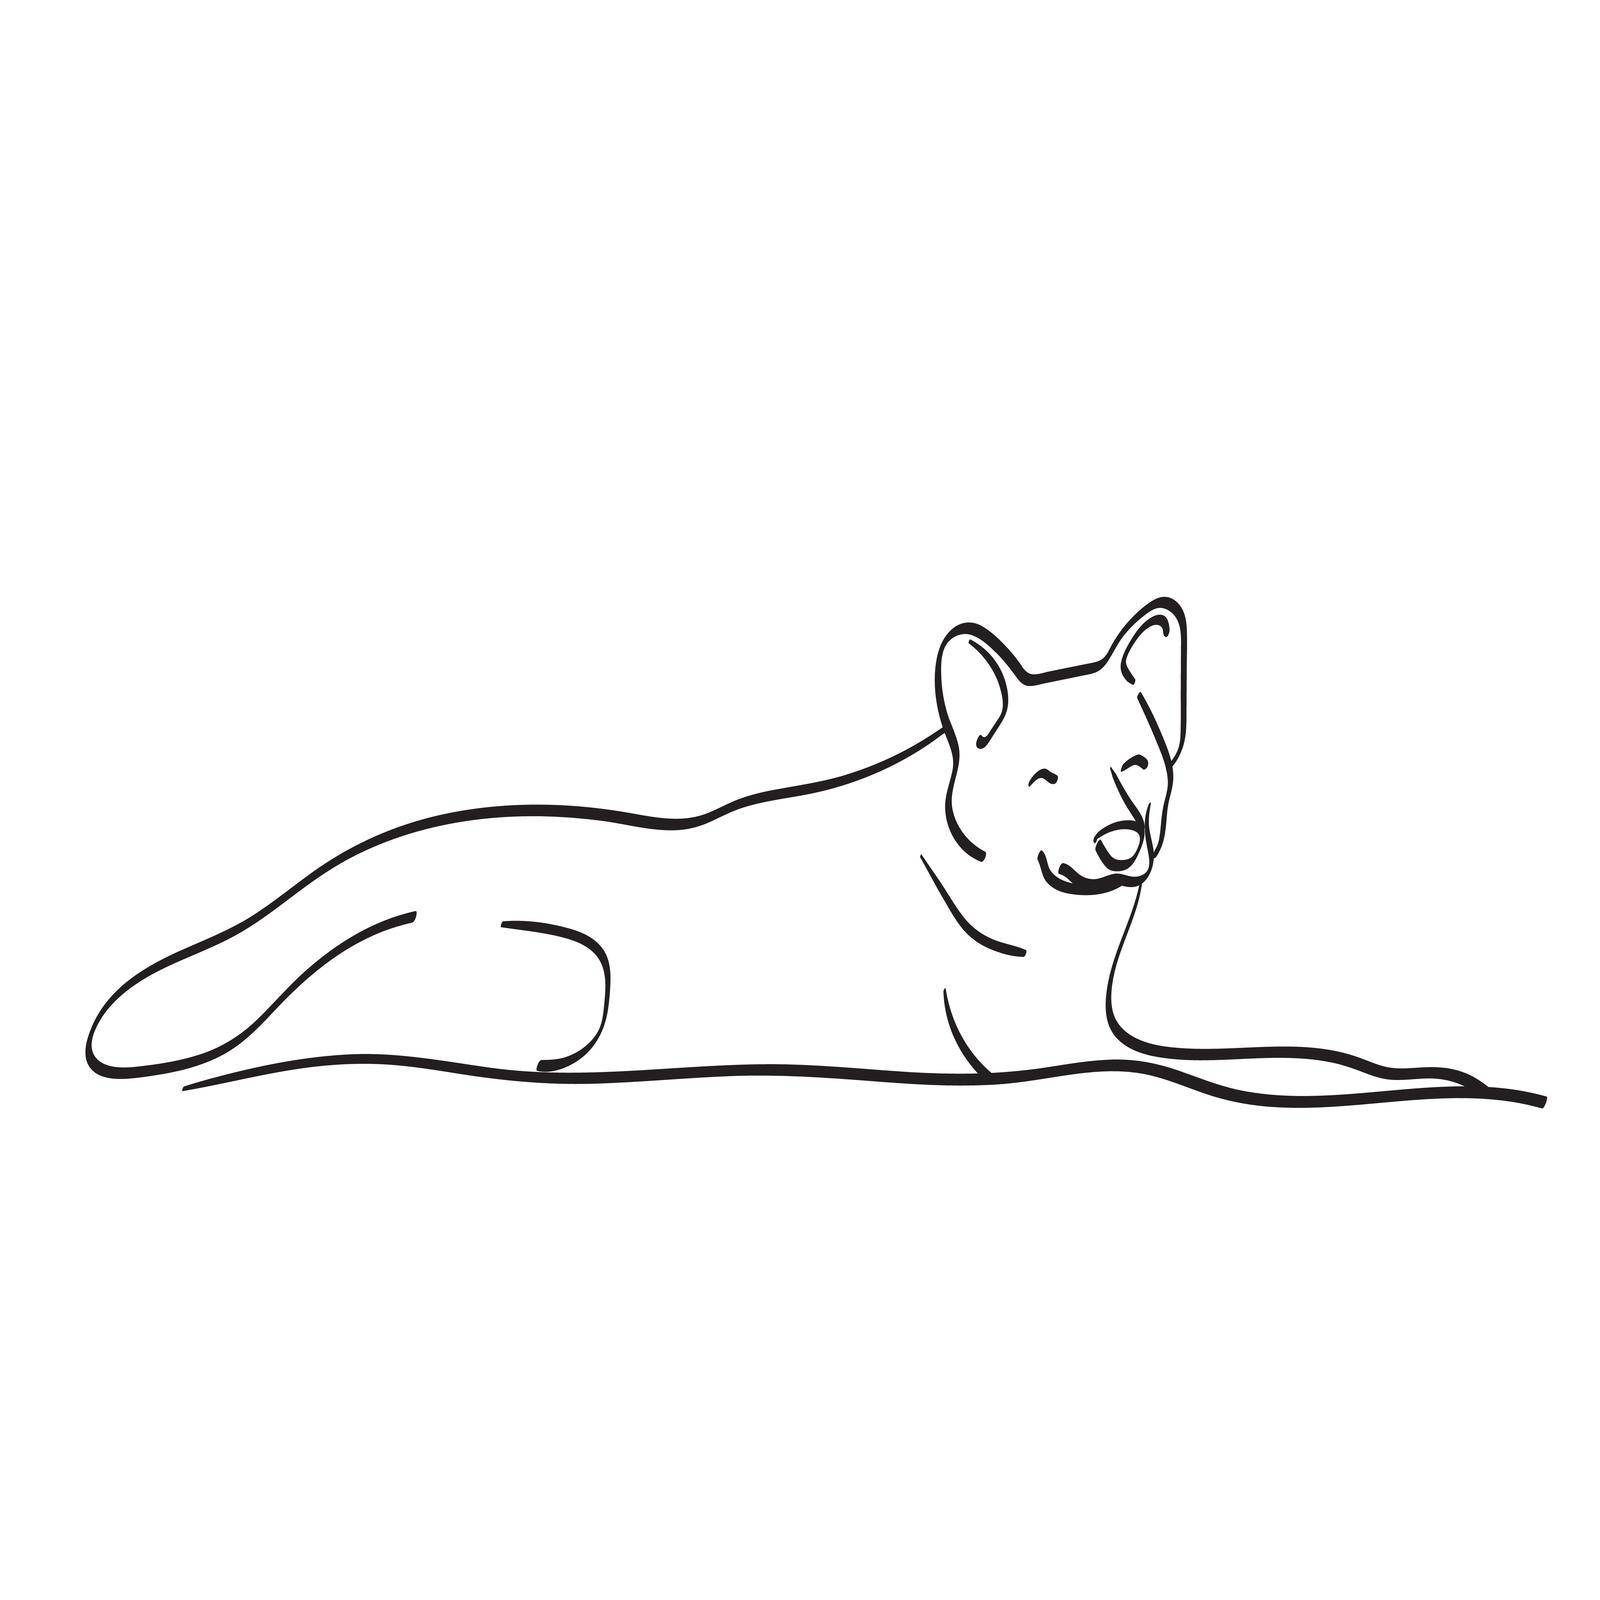 dog laying down on the ground illustration vector hand drawn isolated on white background line art. by tidarattj